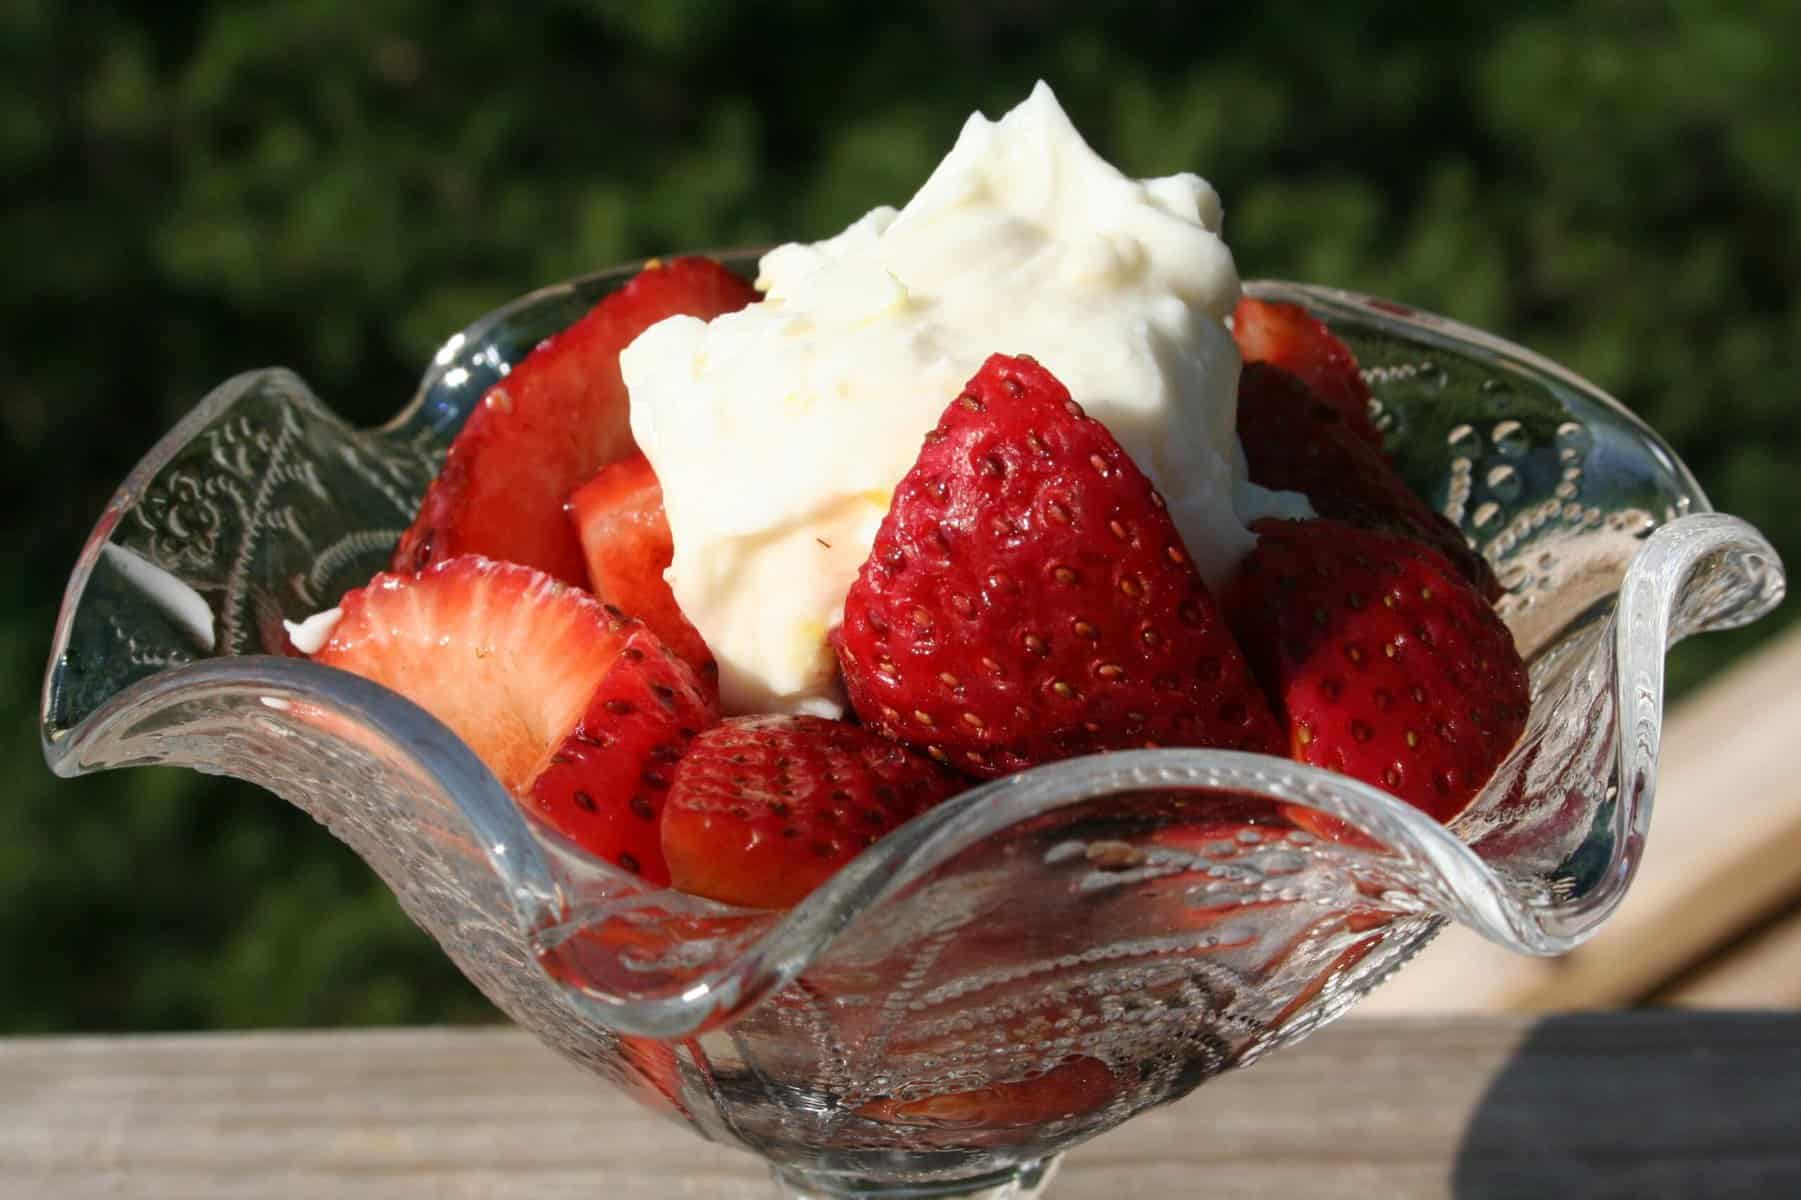  Simple ingredients, big flavor! You don't want to miss this strawberry recipe.